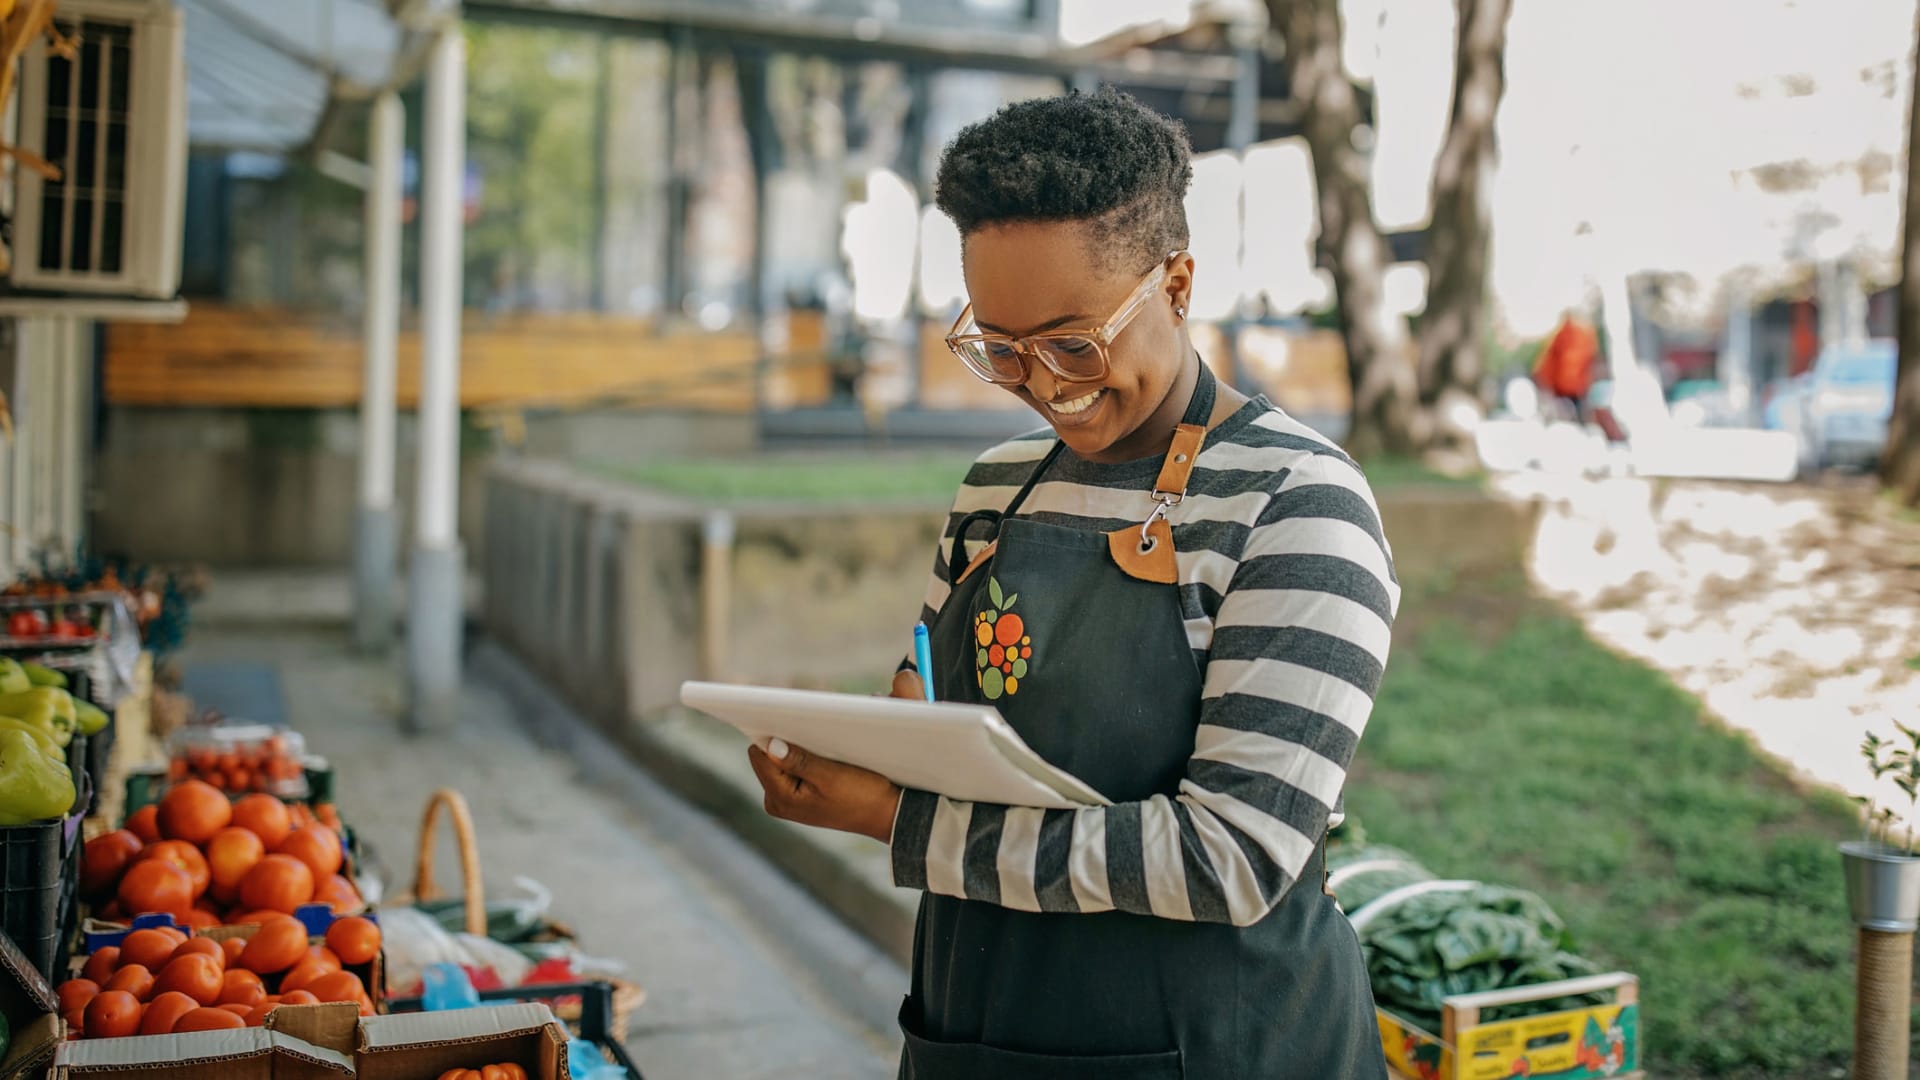 This $1.3 Million Black Small Business Grant Program Is Now Taking Applications